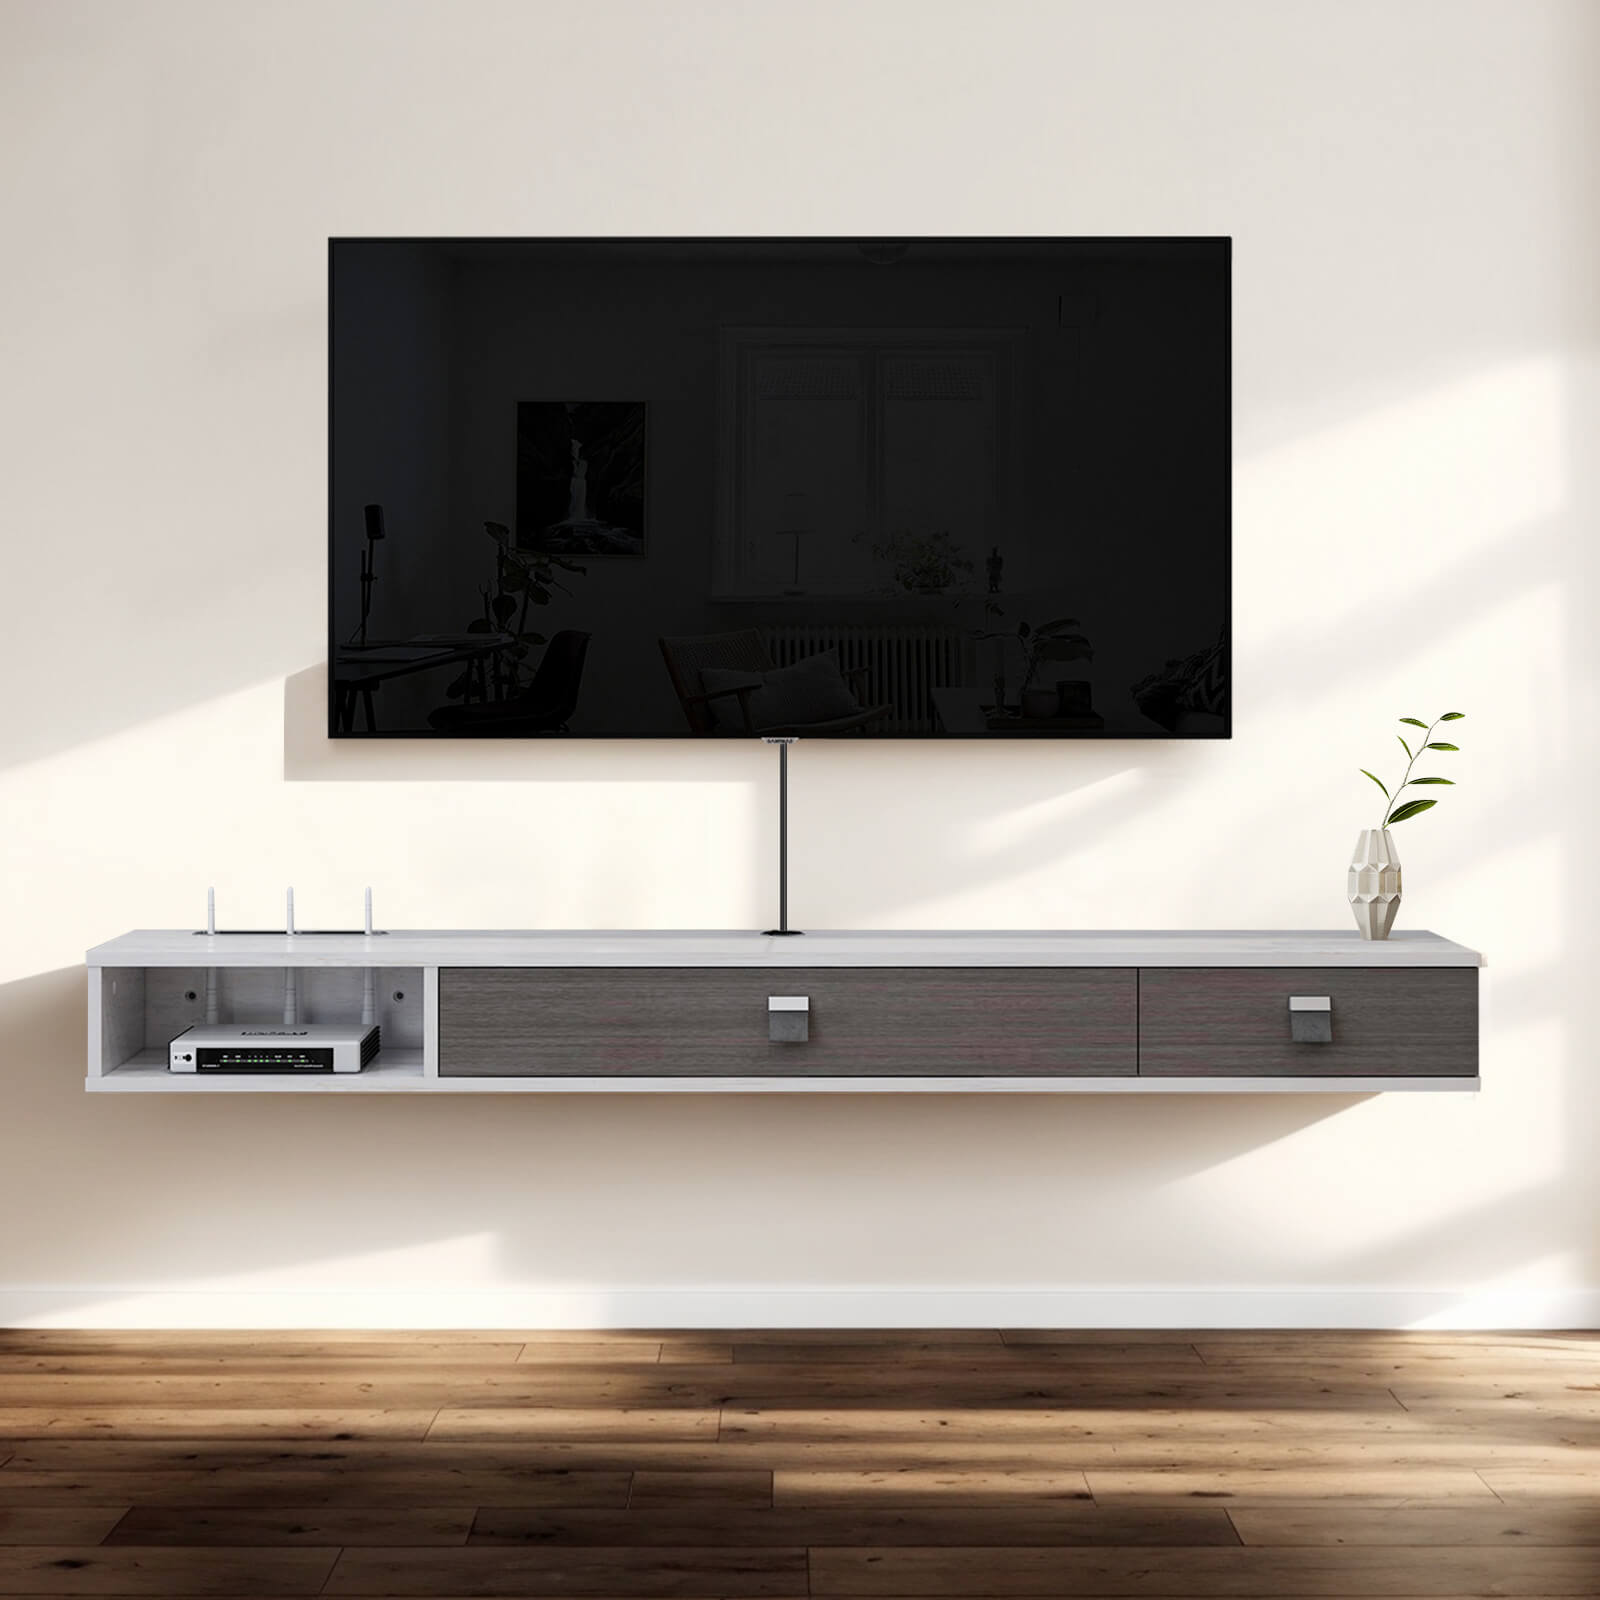 62.99" Plywood Floating TV Stand Wall Shelf with Two Doors for 65" 70" TVs, Off White